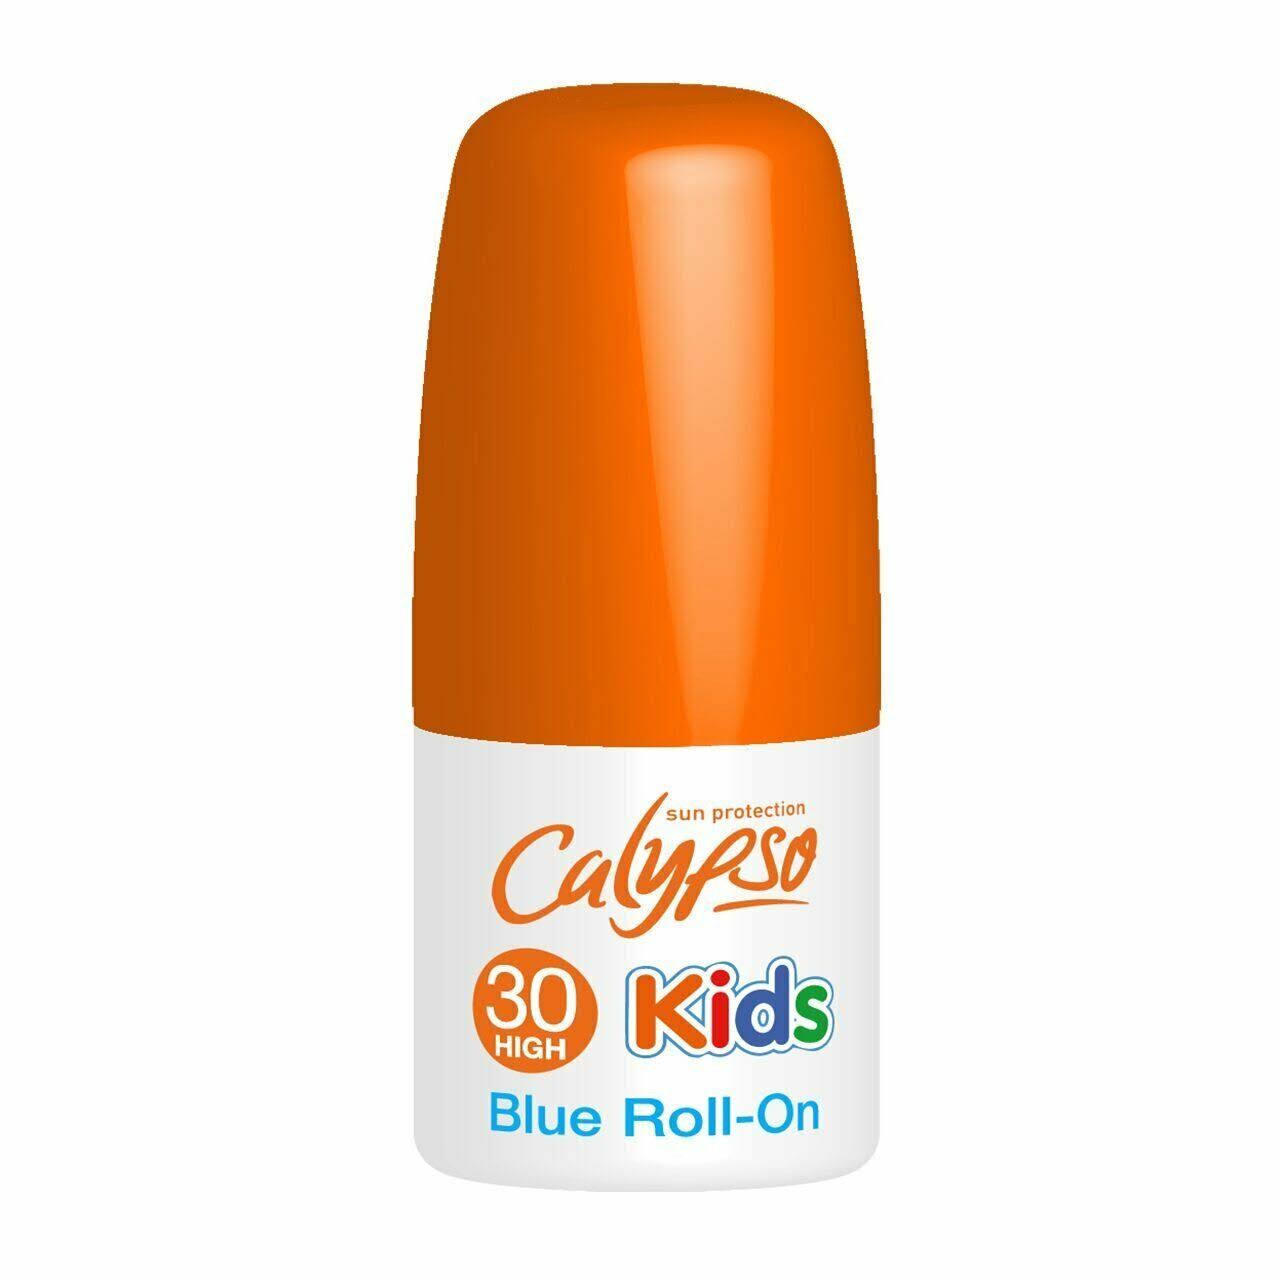 Calypso Colour Changing Blue Kids Roll On Sun Tan Lotion - Spf30, 50ml